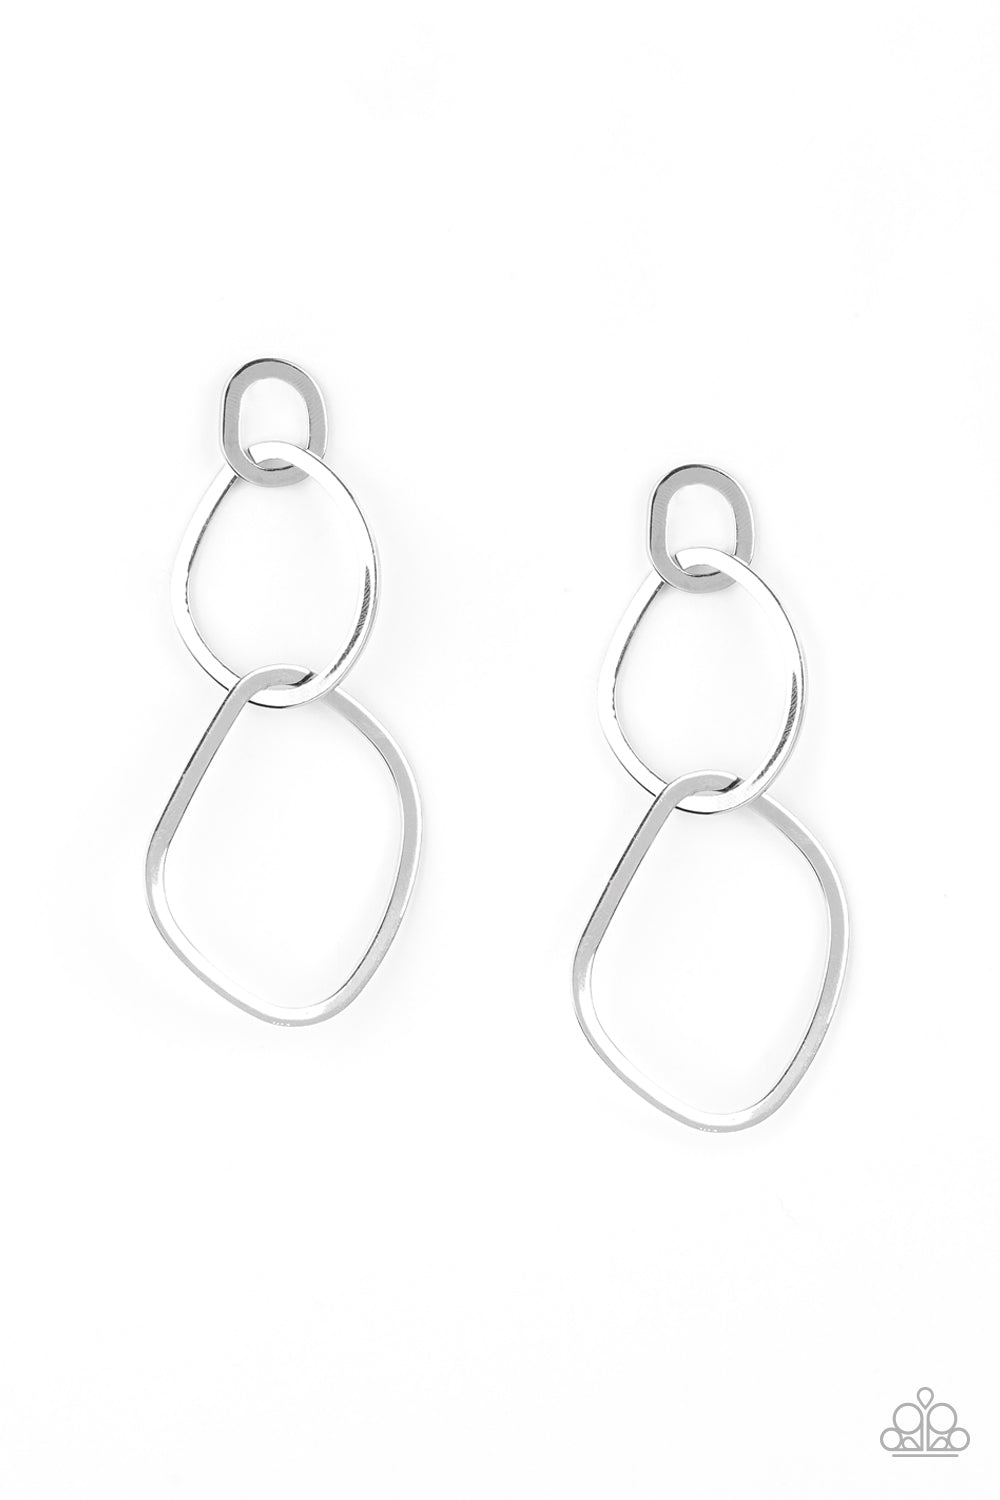 Paparazzi Twisted Trio - Silver Hoop Earrings - A Finishing Touch 